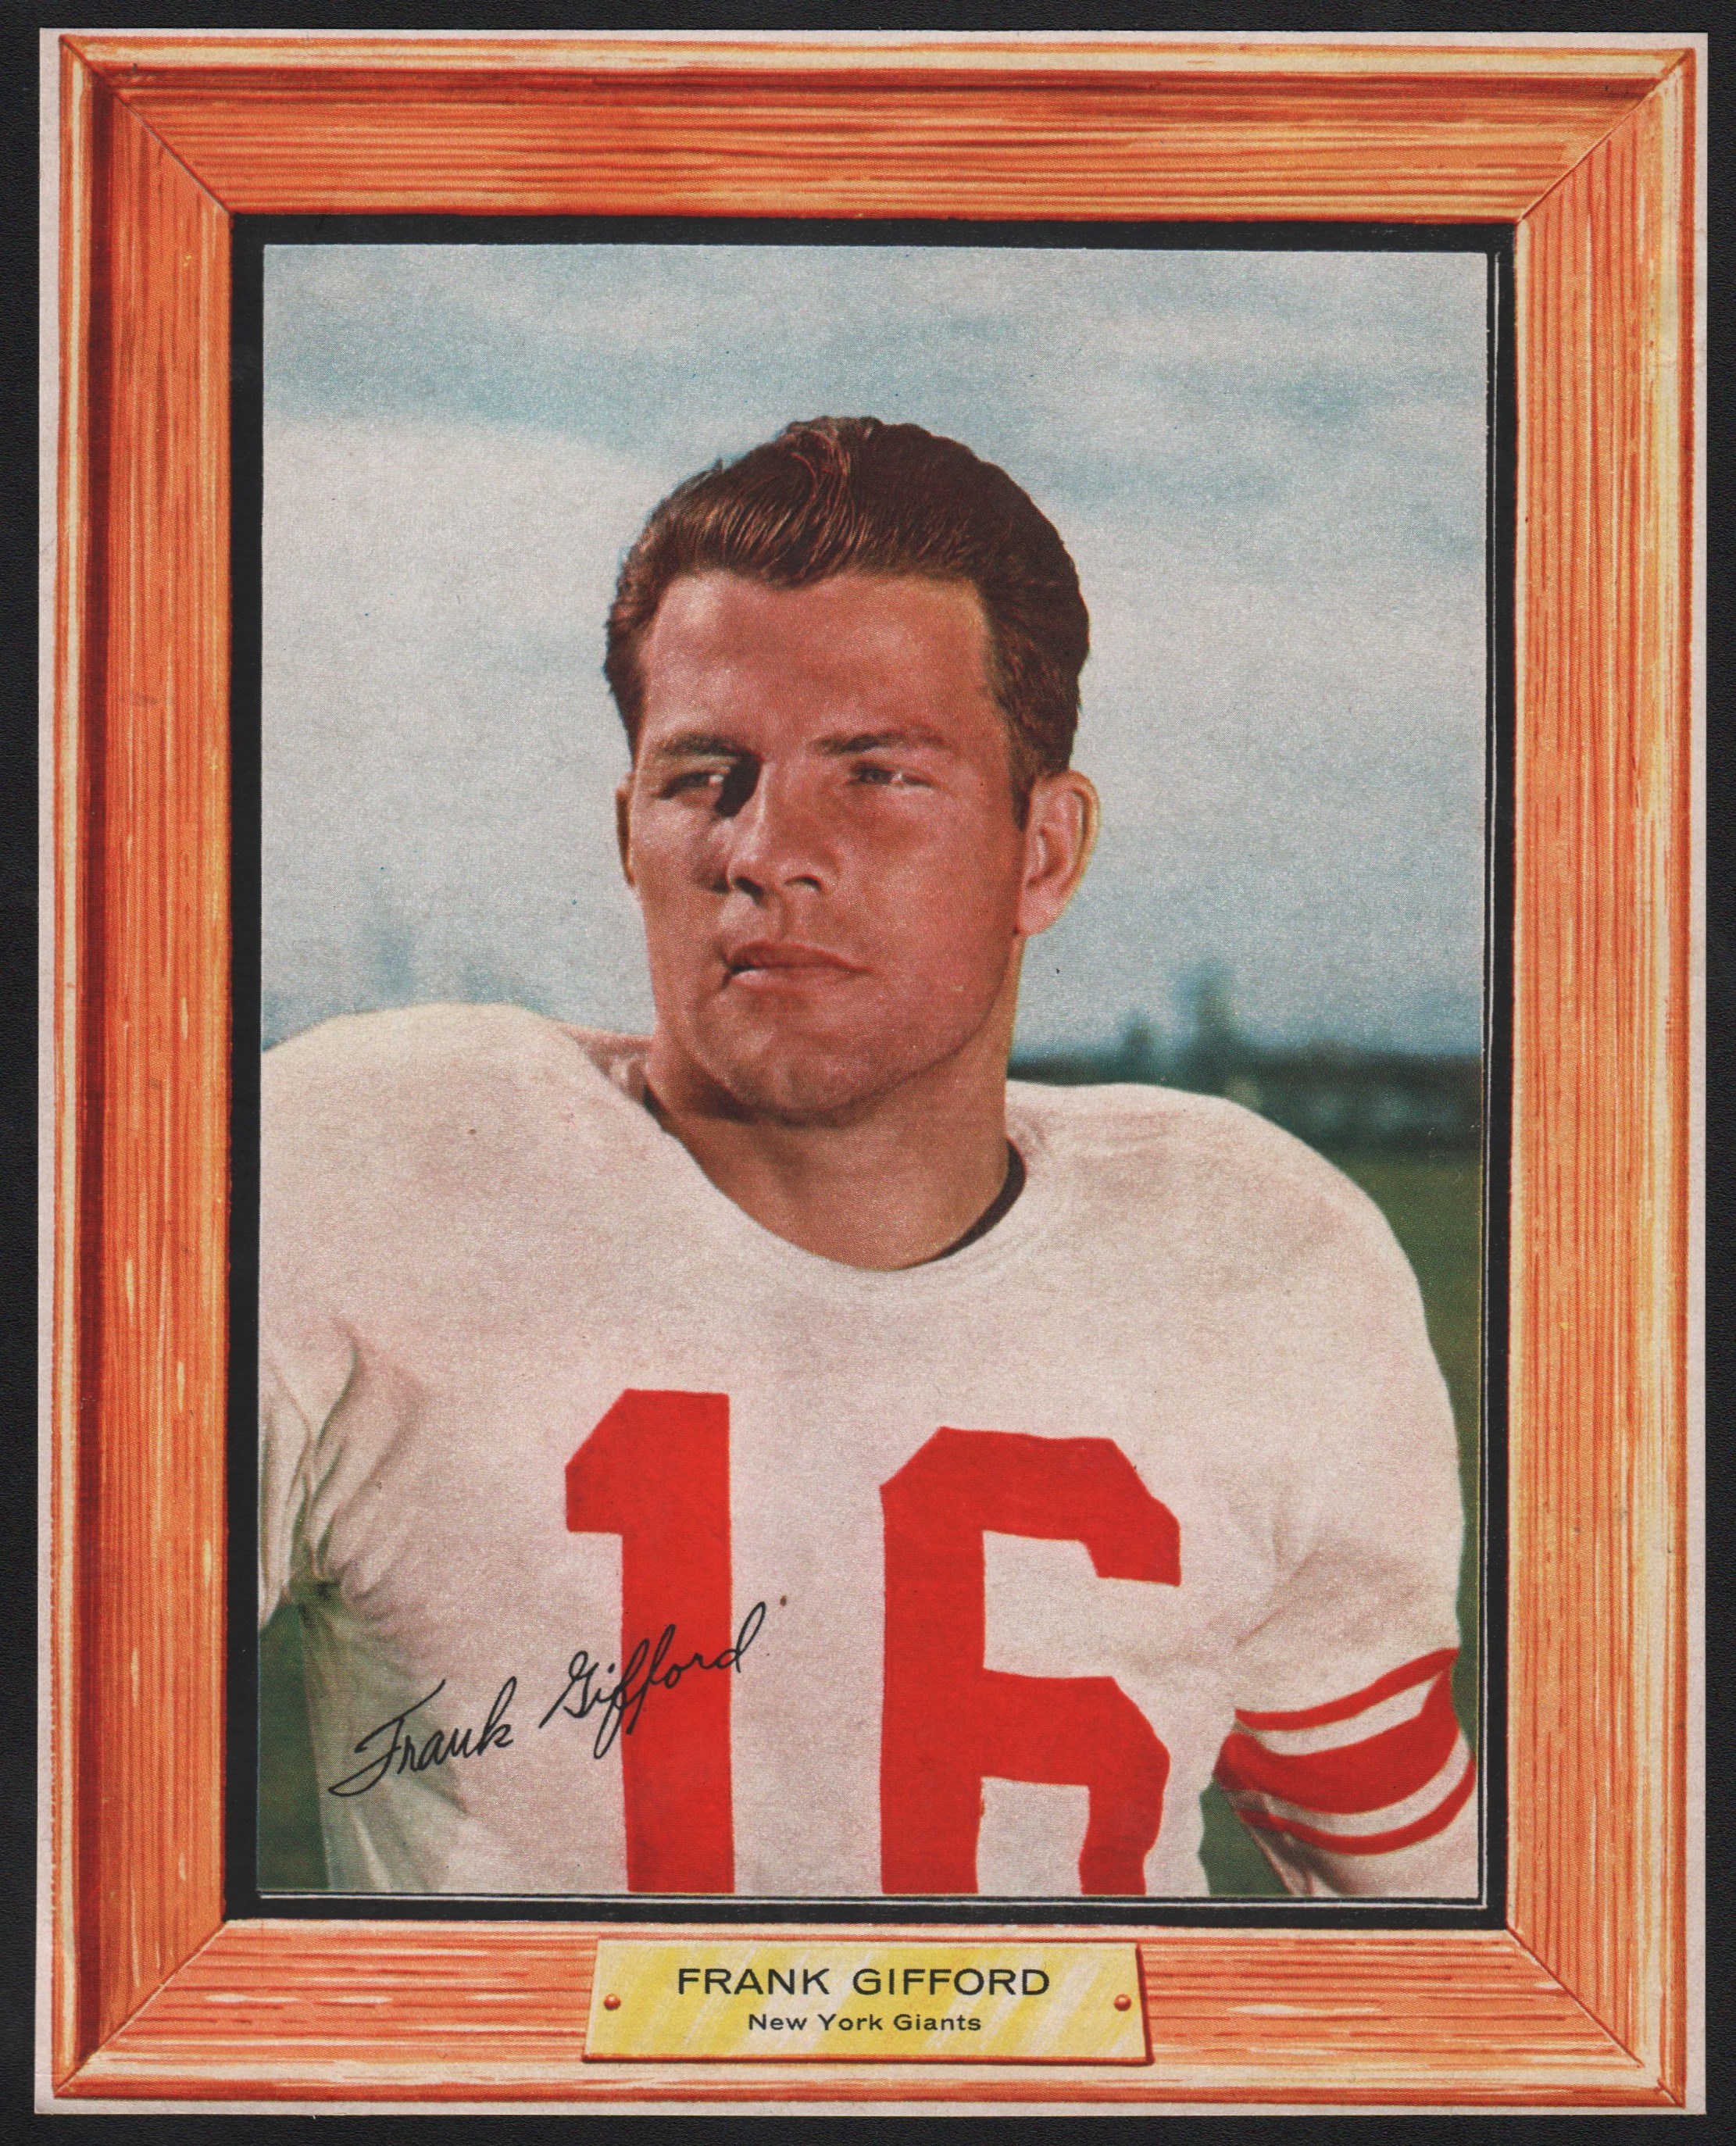 - 1960 Post Cereal Frank Gifford - Rare!